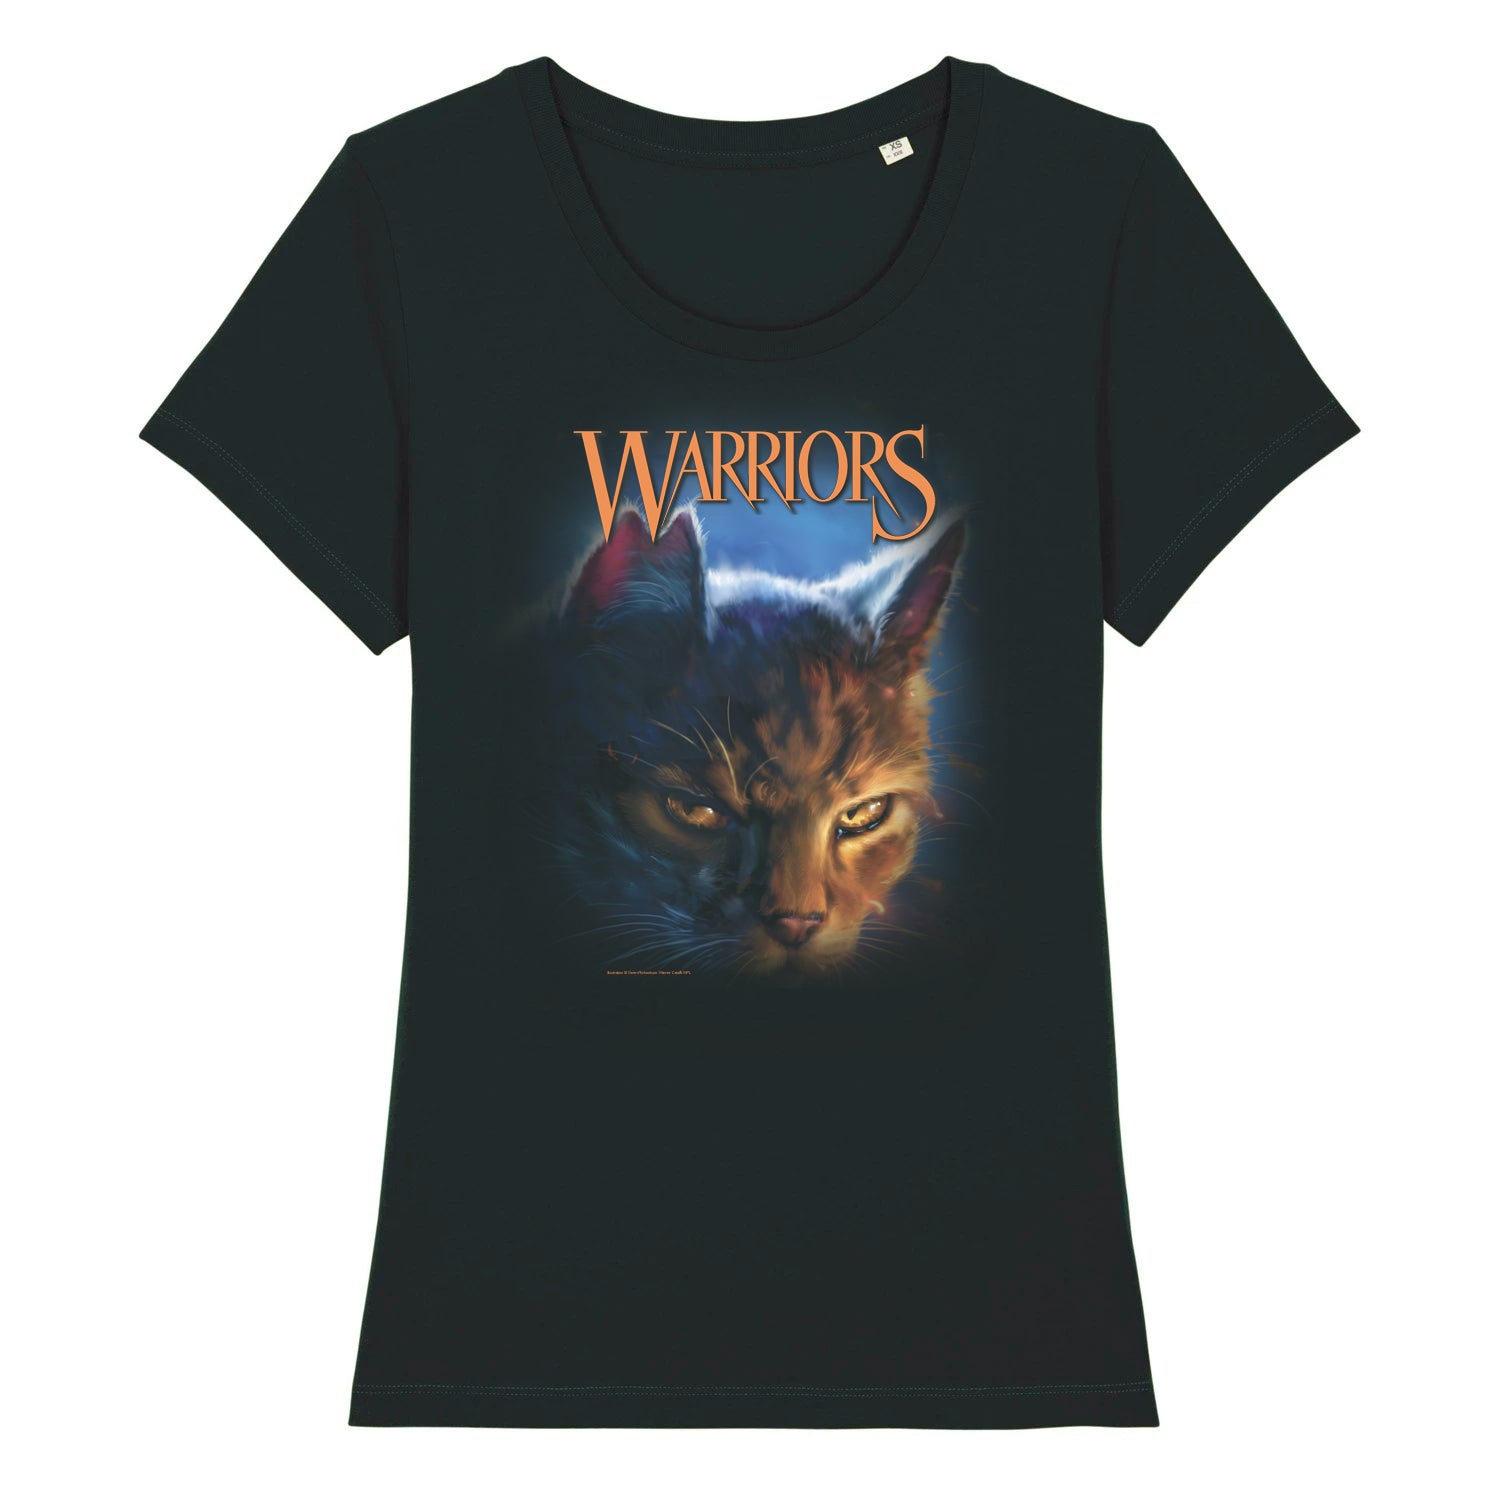 Fire And Ice - Adult Ladies T-Shirt